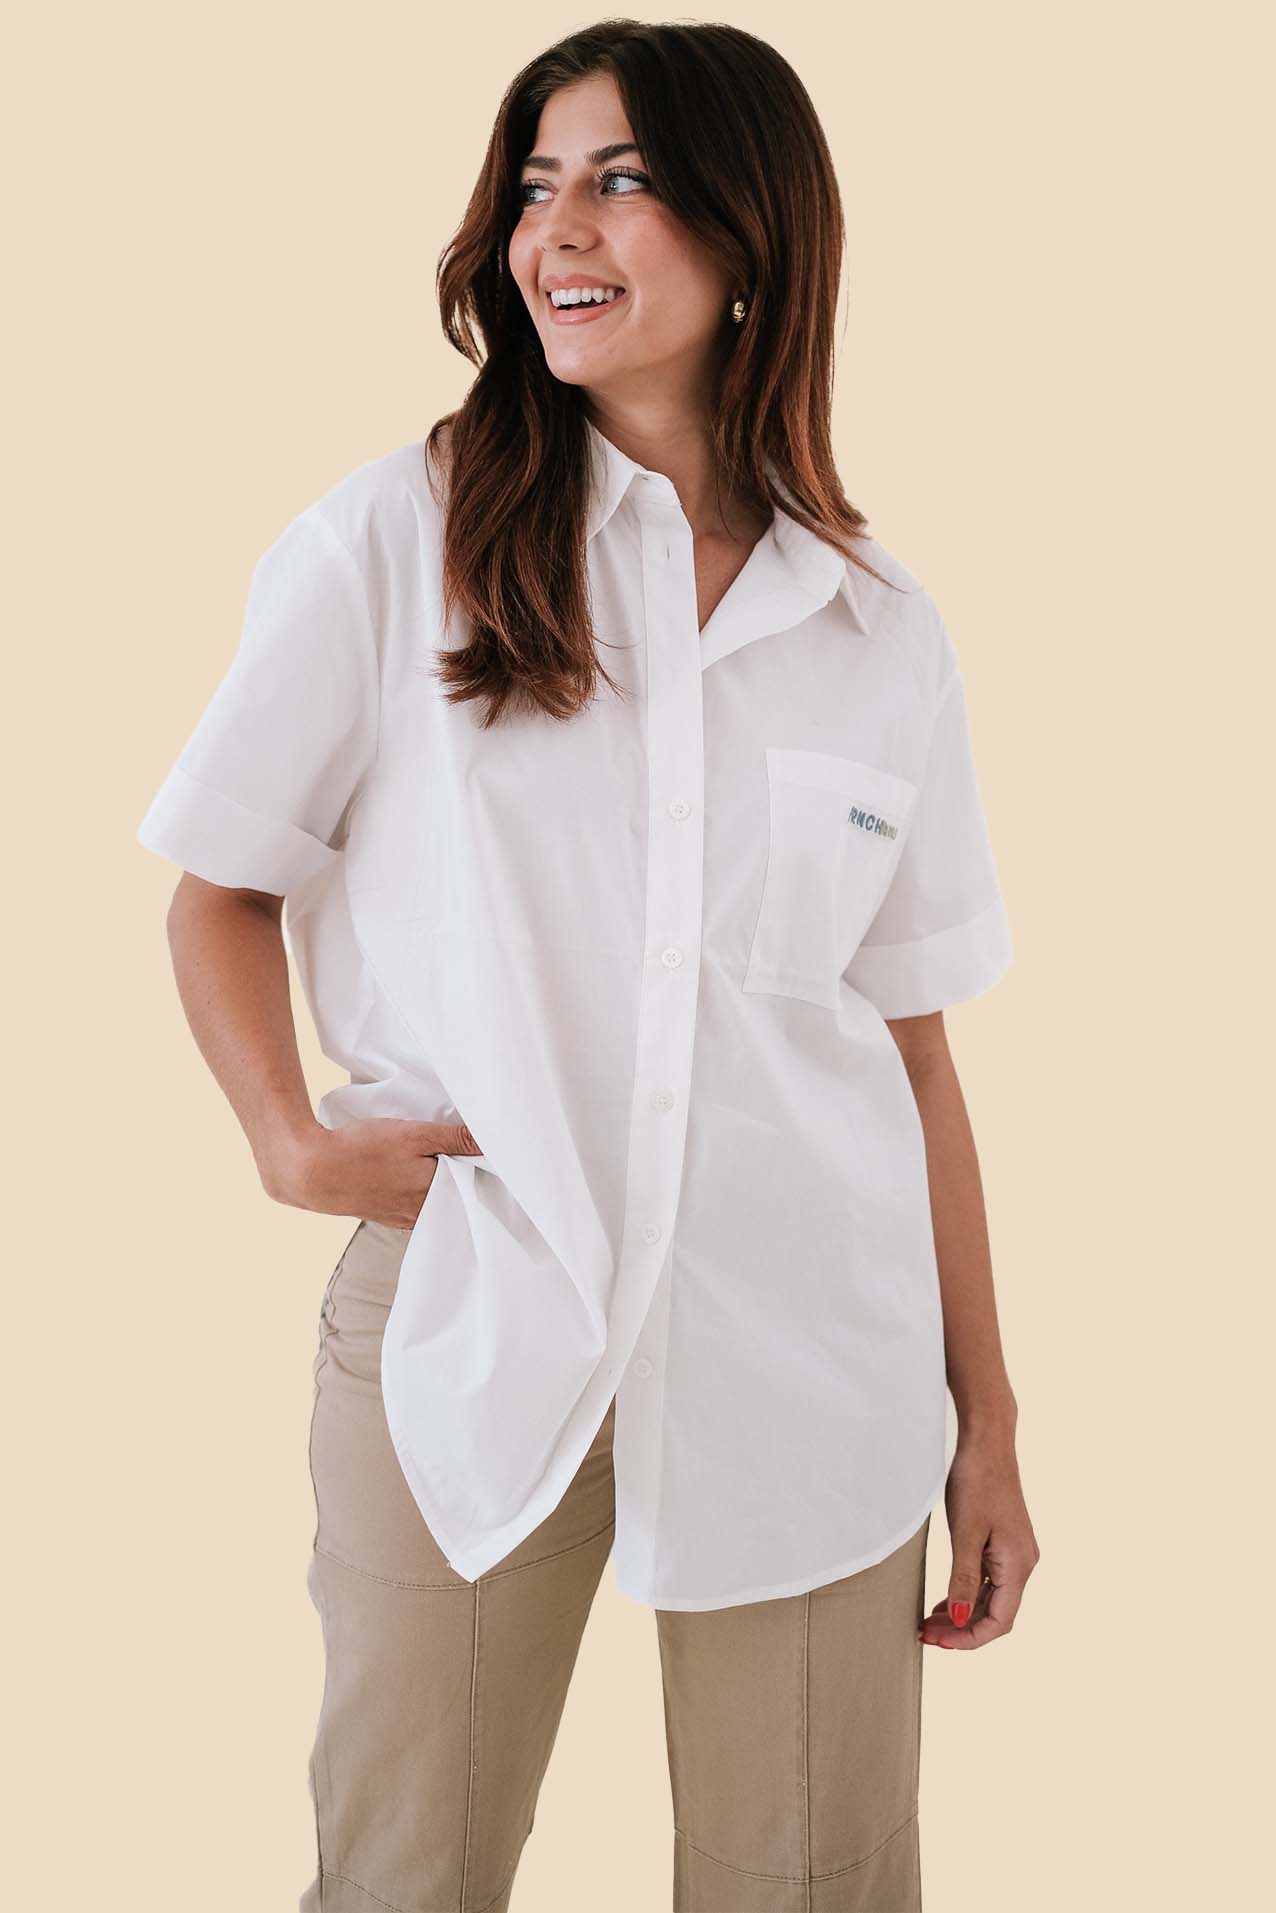 FRNCH Ania White Embroidered Pocket Collared Top